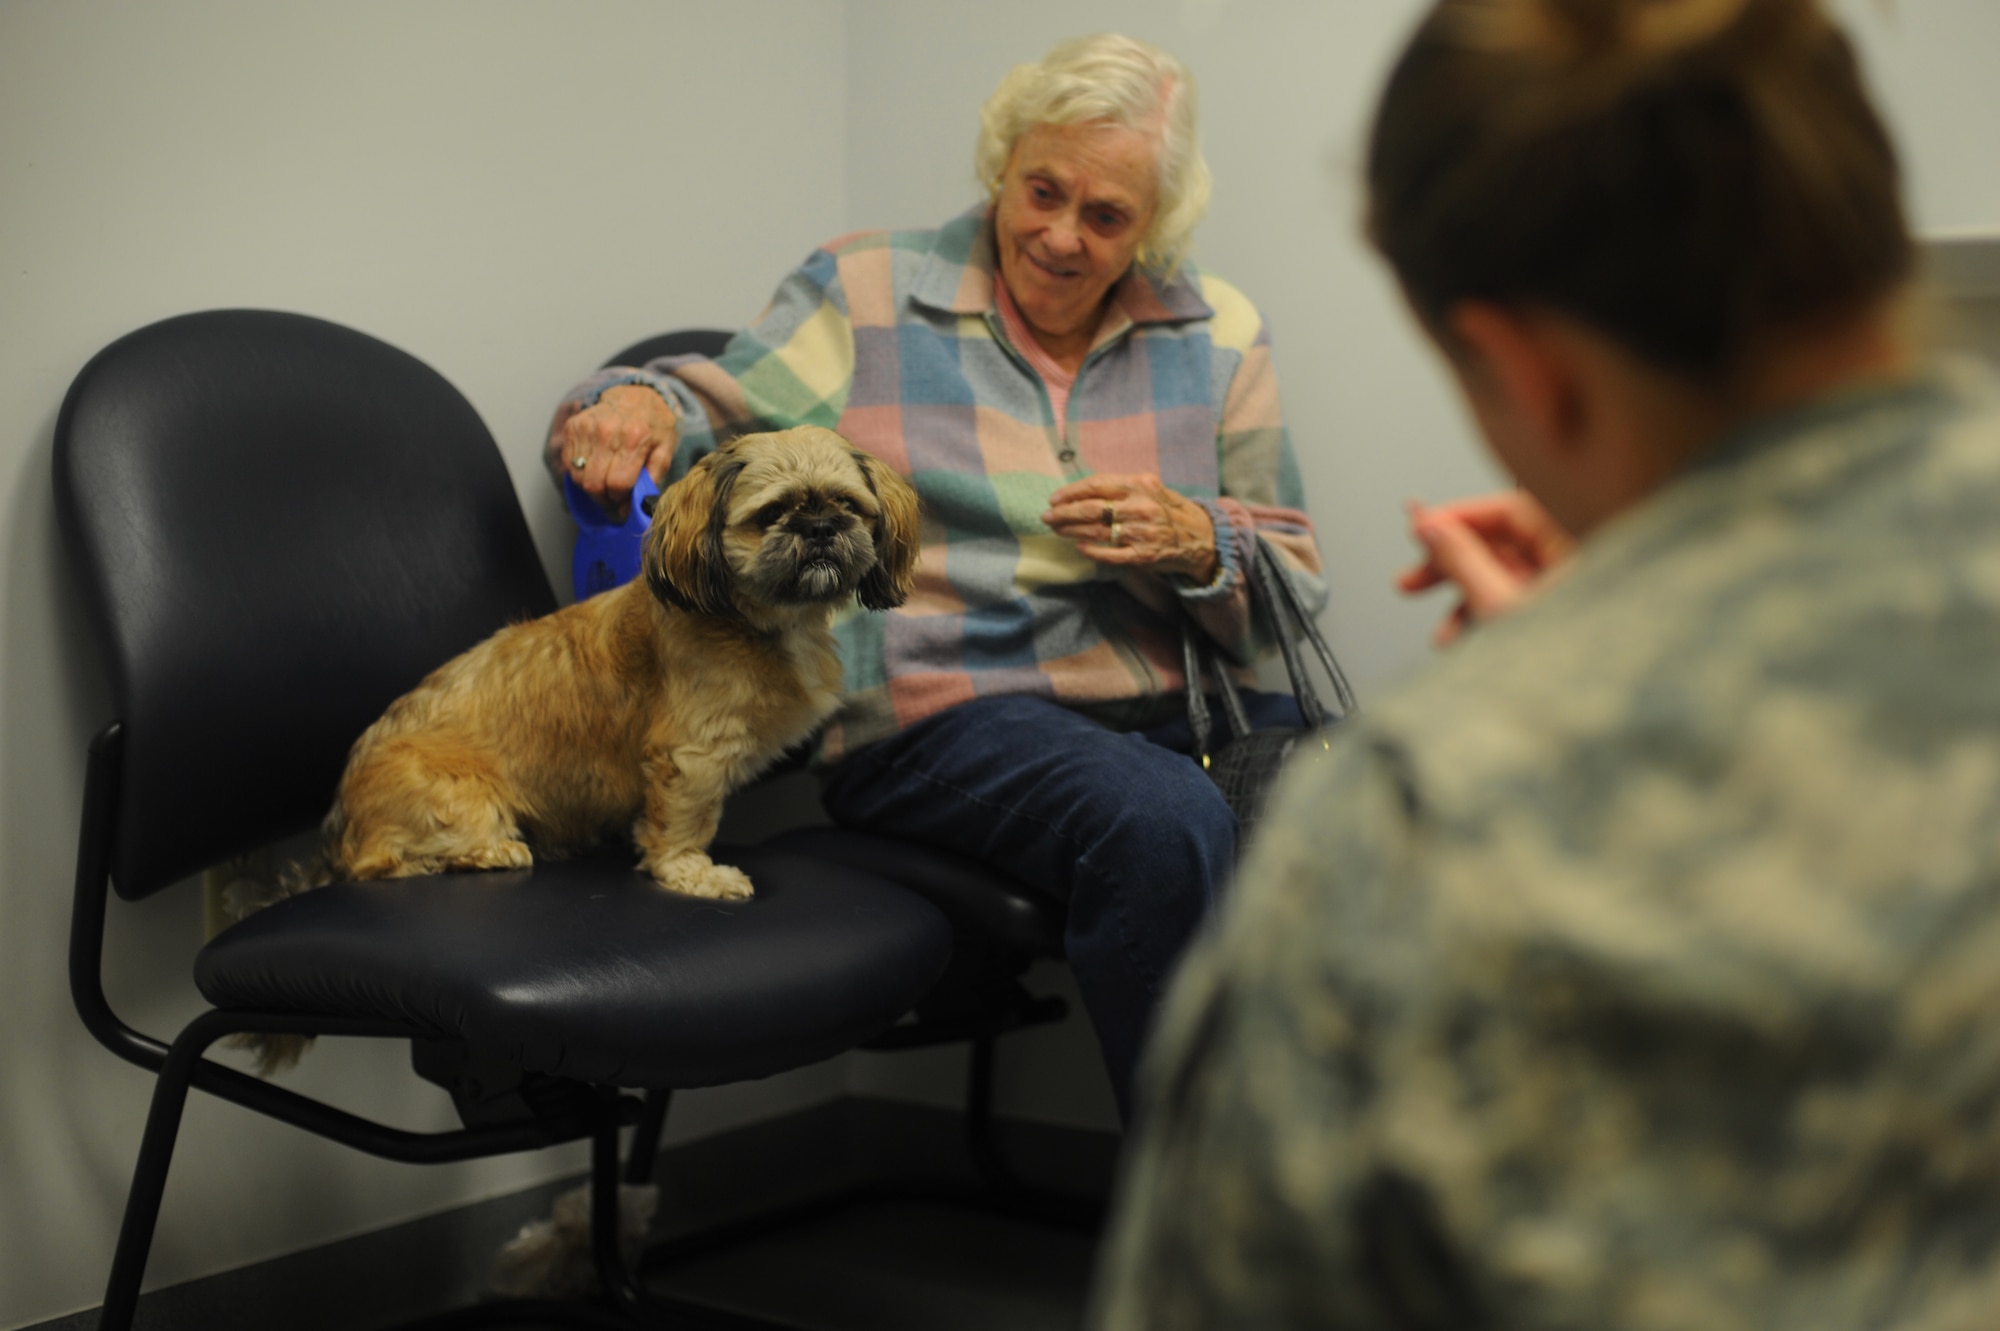 Army Capt. Amanda Jeffries, Chief of Dover Branch Veterinary Services, offers Murphy a treat after his examination, while his owner, Maryann Khane watches October 15, 2014, at the Veterinary Treatment Facility on Dover Air Force Base, Del. The VTF can accept same day sick call appointments for routine issues. (U.S. Air Force photo by Staff Sgt. Elizabeth Morris)